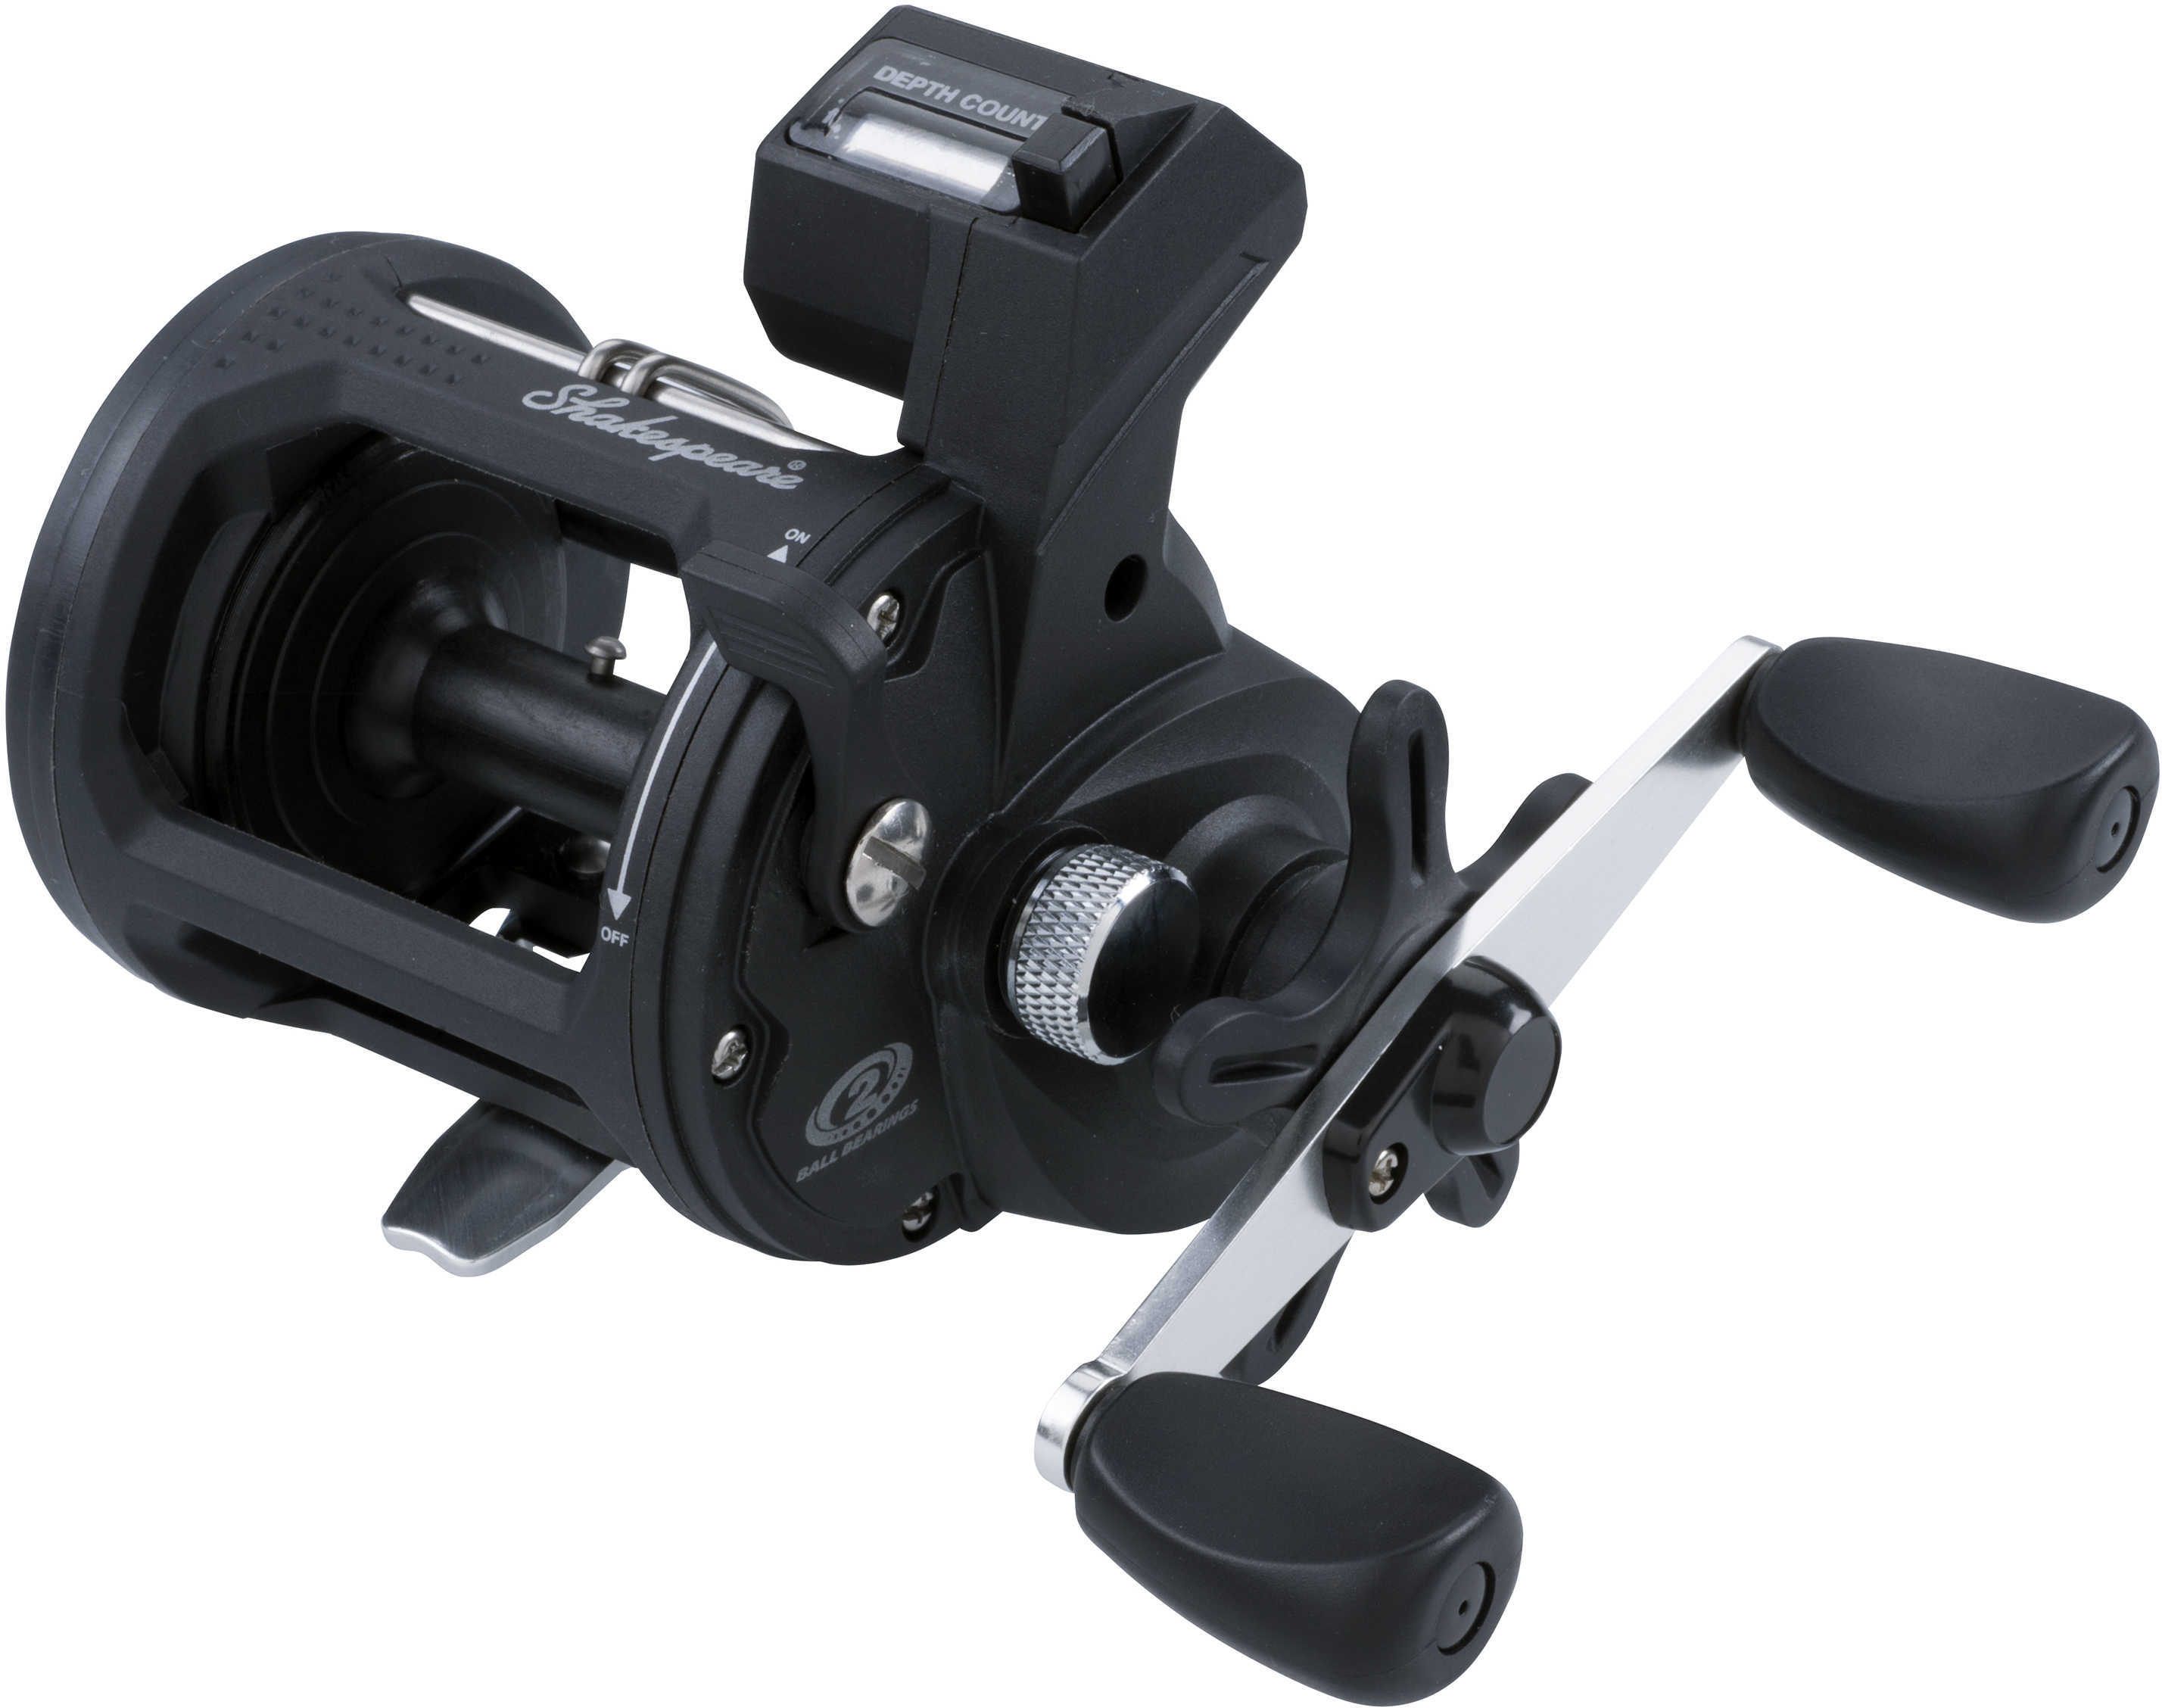 Shakespeare ATS Reels 5.1:1 Gear Ratio, 2 Bearings, 235/17 Capacity, Line Counter, Boxed Md: 1366922